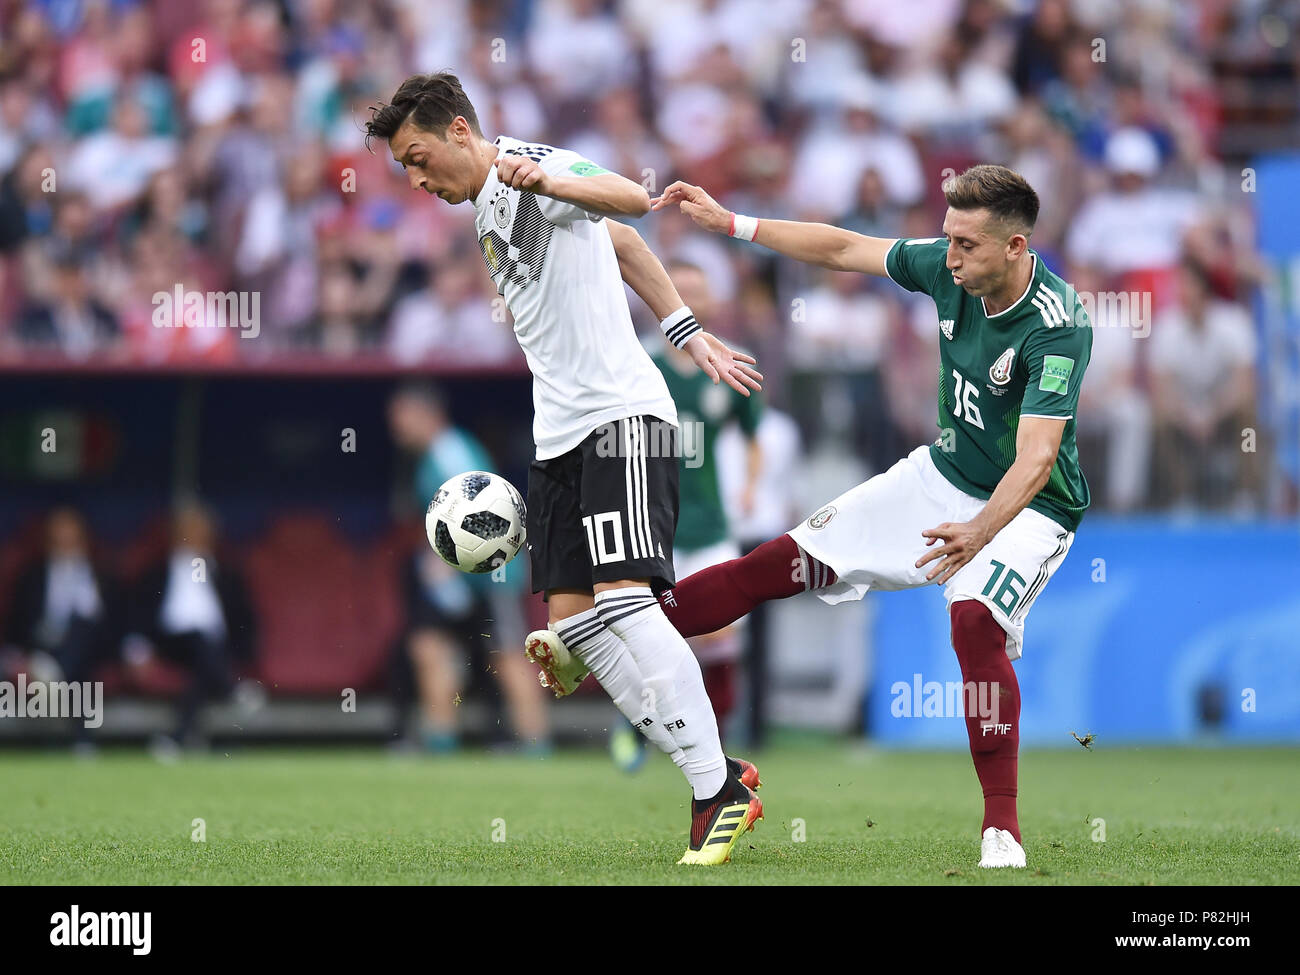 MOSCOW, RUSSIA - JUNE 17: Hector Herrera of Mexico competes with Mesut Oezil of Germany during the 2018 FIFA World Cup Russia group F match between Germany and Mexico at Luzhniki Stadium on June 17, 2018 in Moscow, Russia. (Photo by Lukasz Laskowski/PressFocus/MB Media) Stock Photo